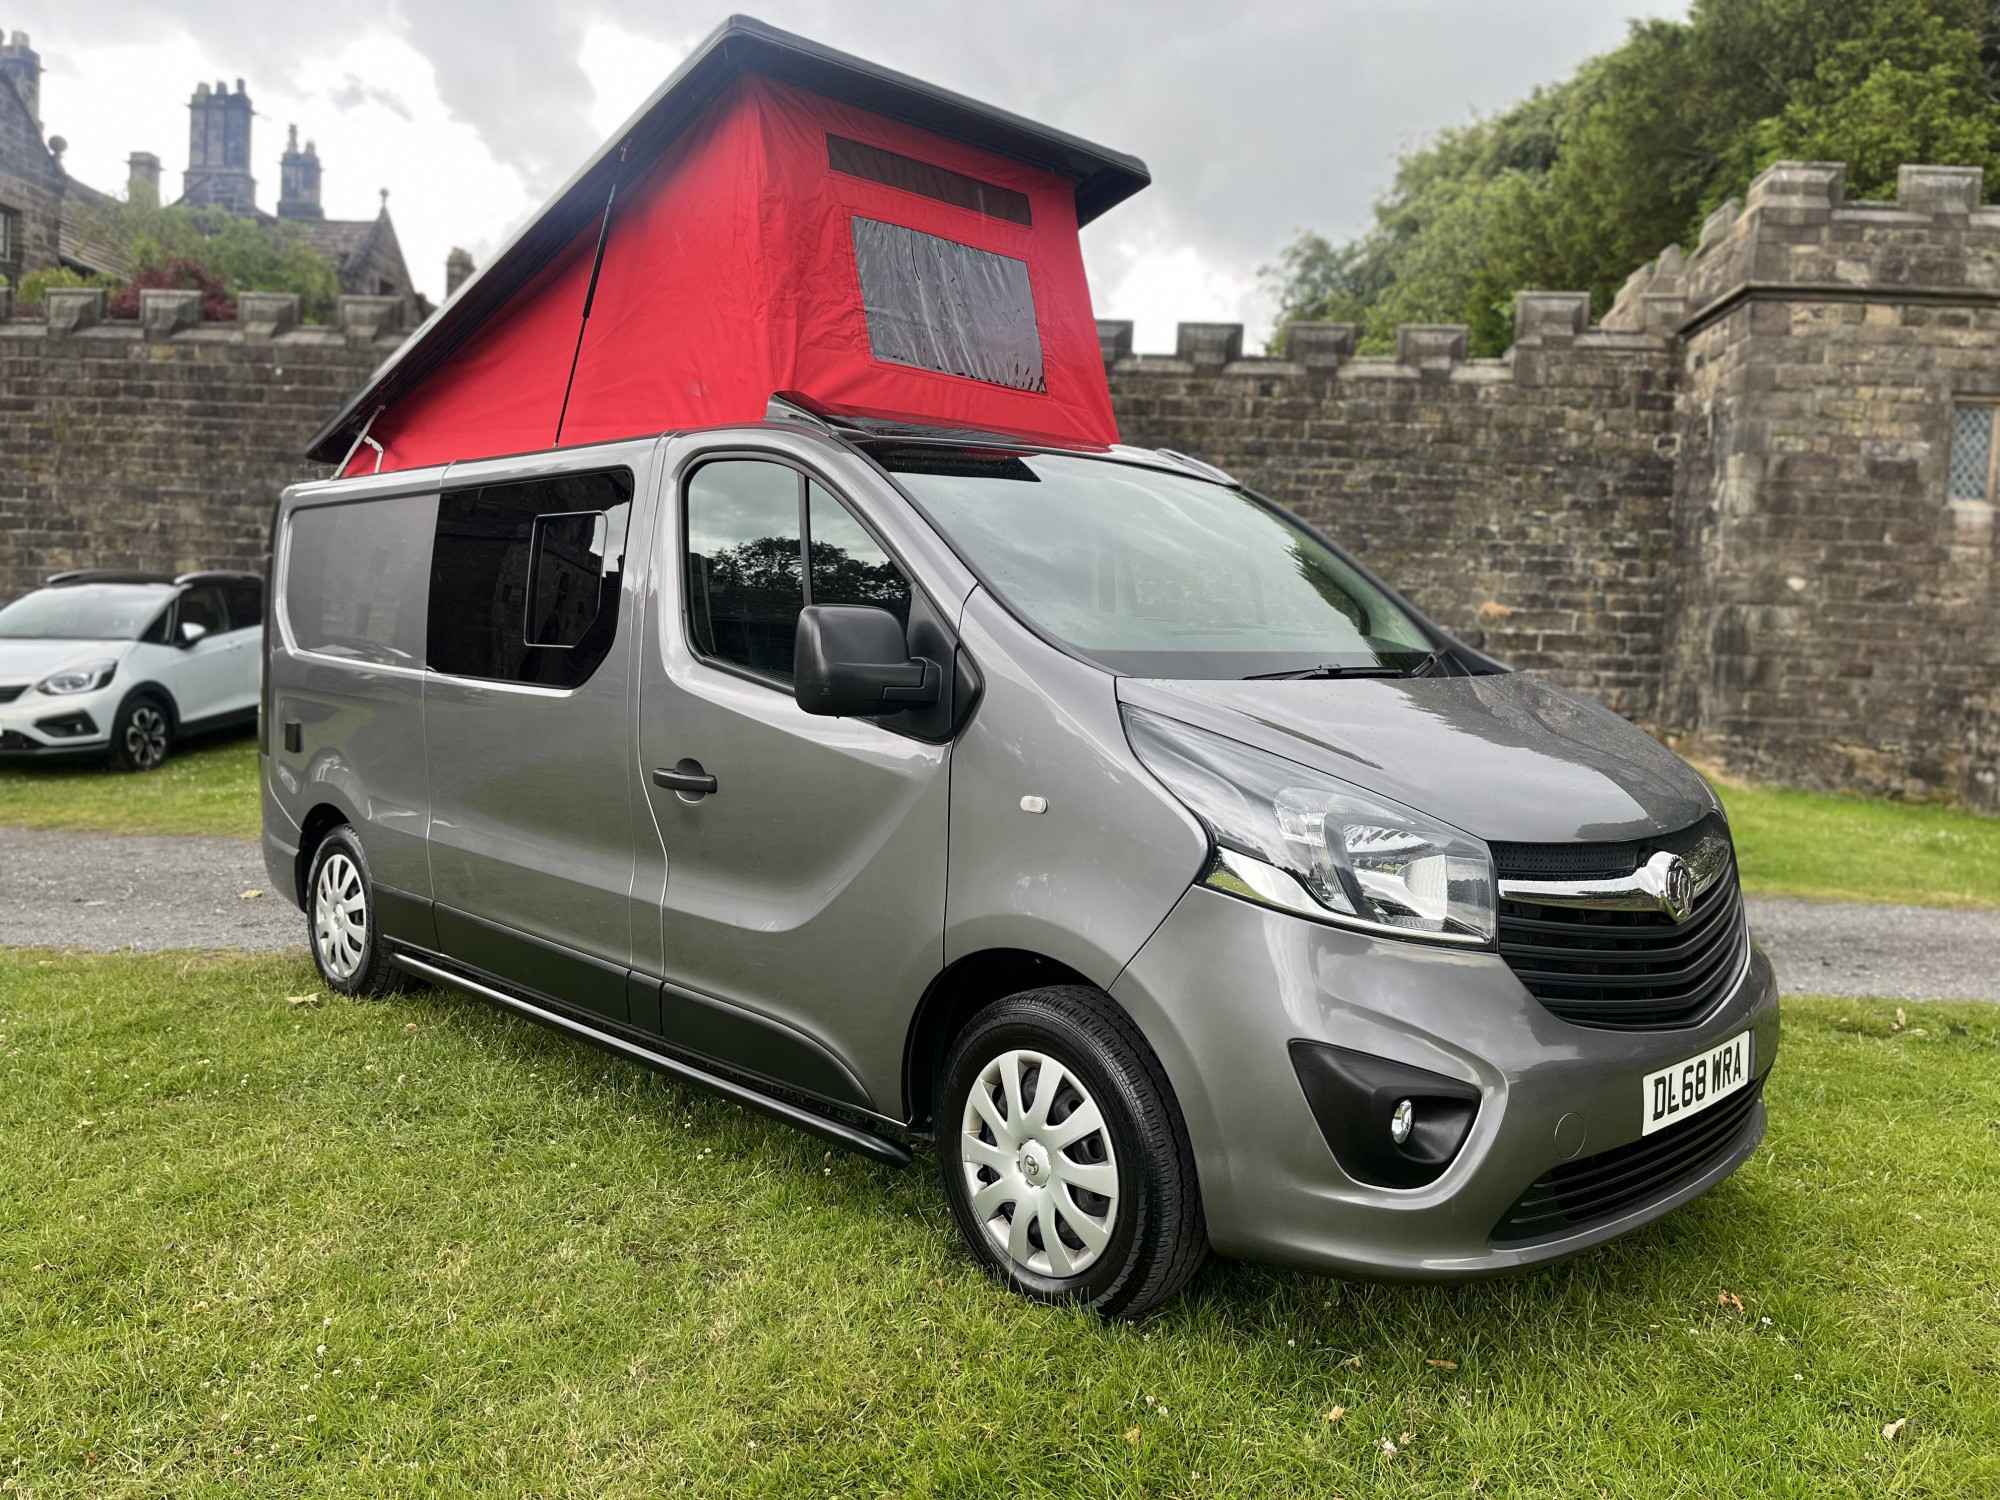 A Vauxhall Campervan called Our-ViV and for hire in Chorley, Lancashire